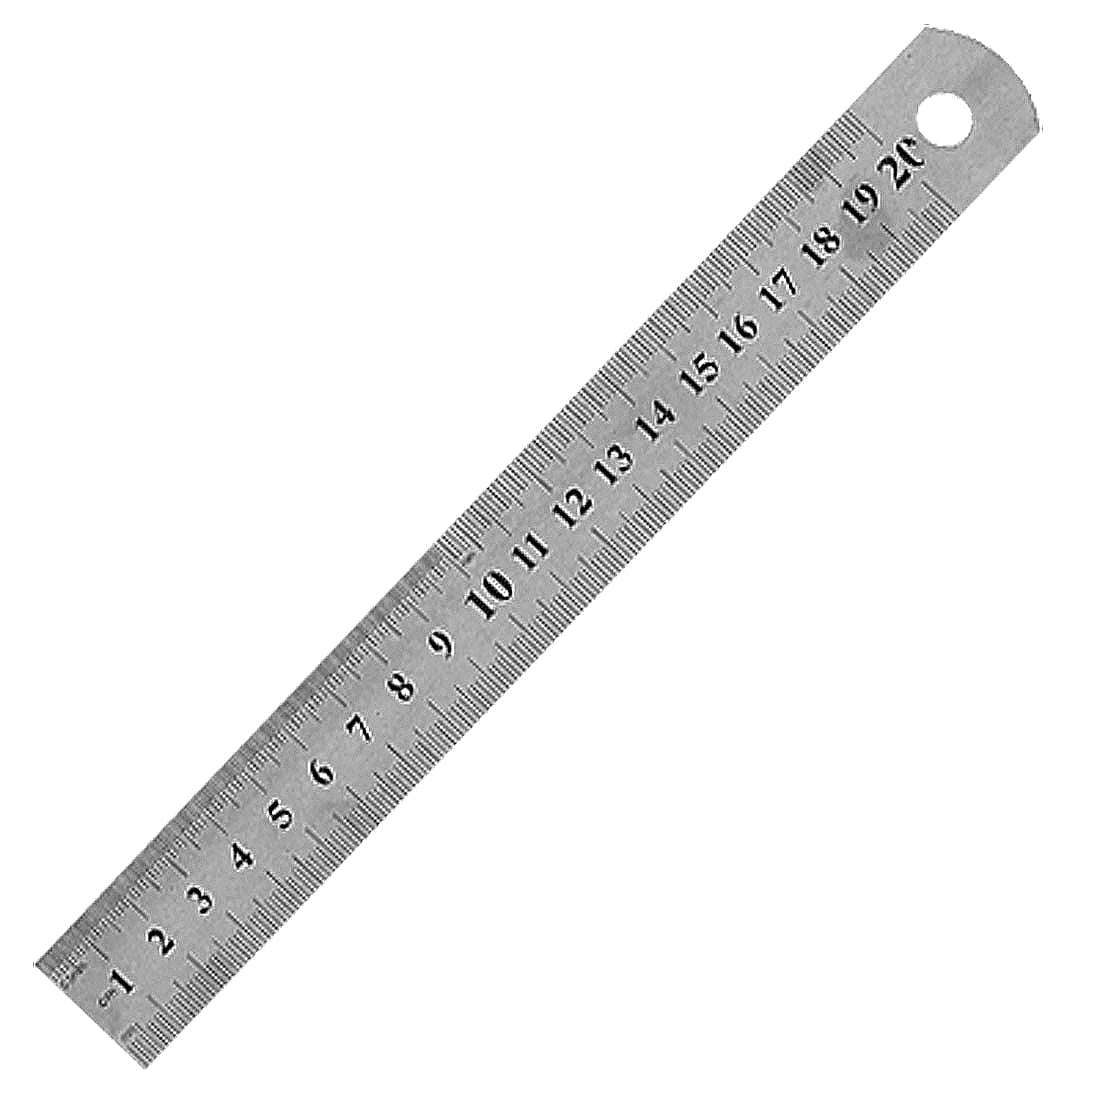 Unique Bargains 0.05mm Resolution Straight Ruler 20cm 8 Inches Tool